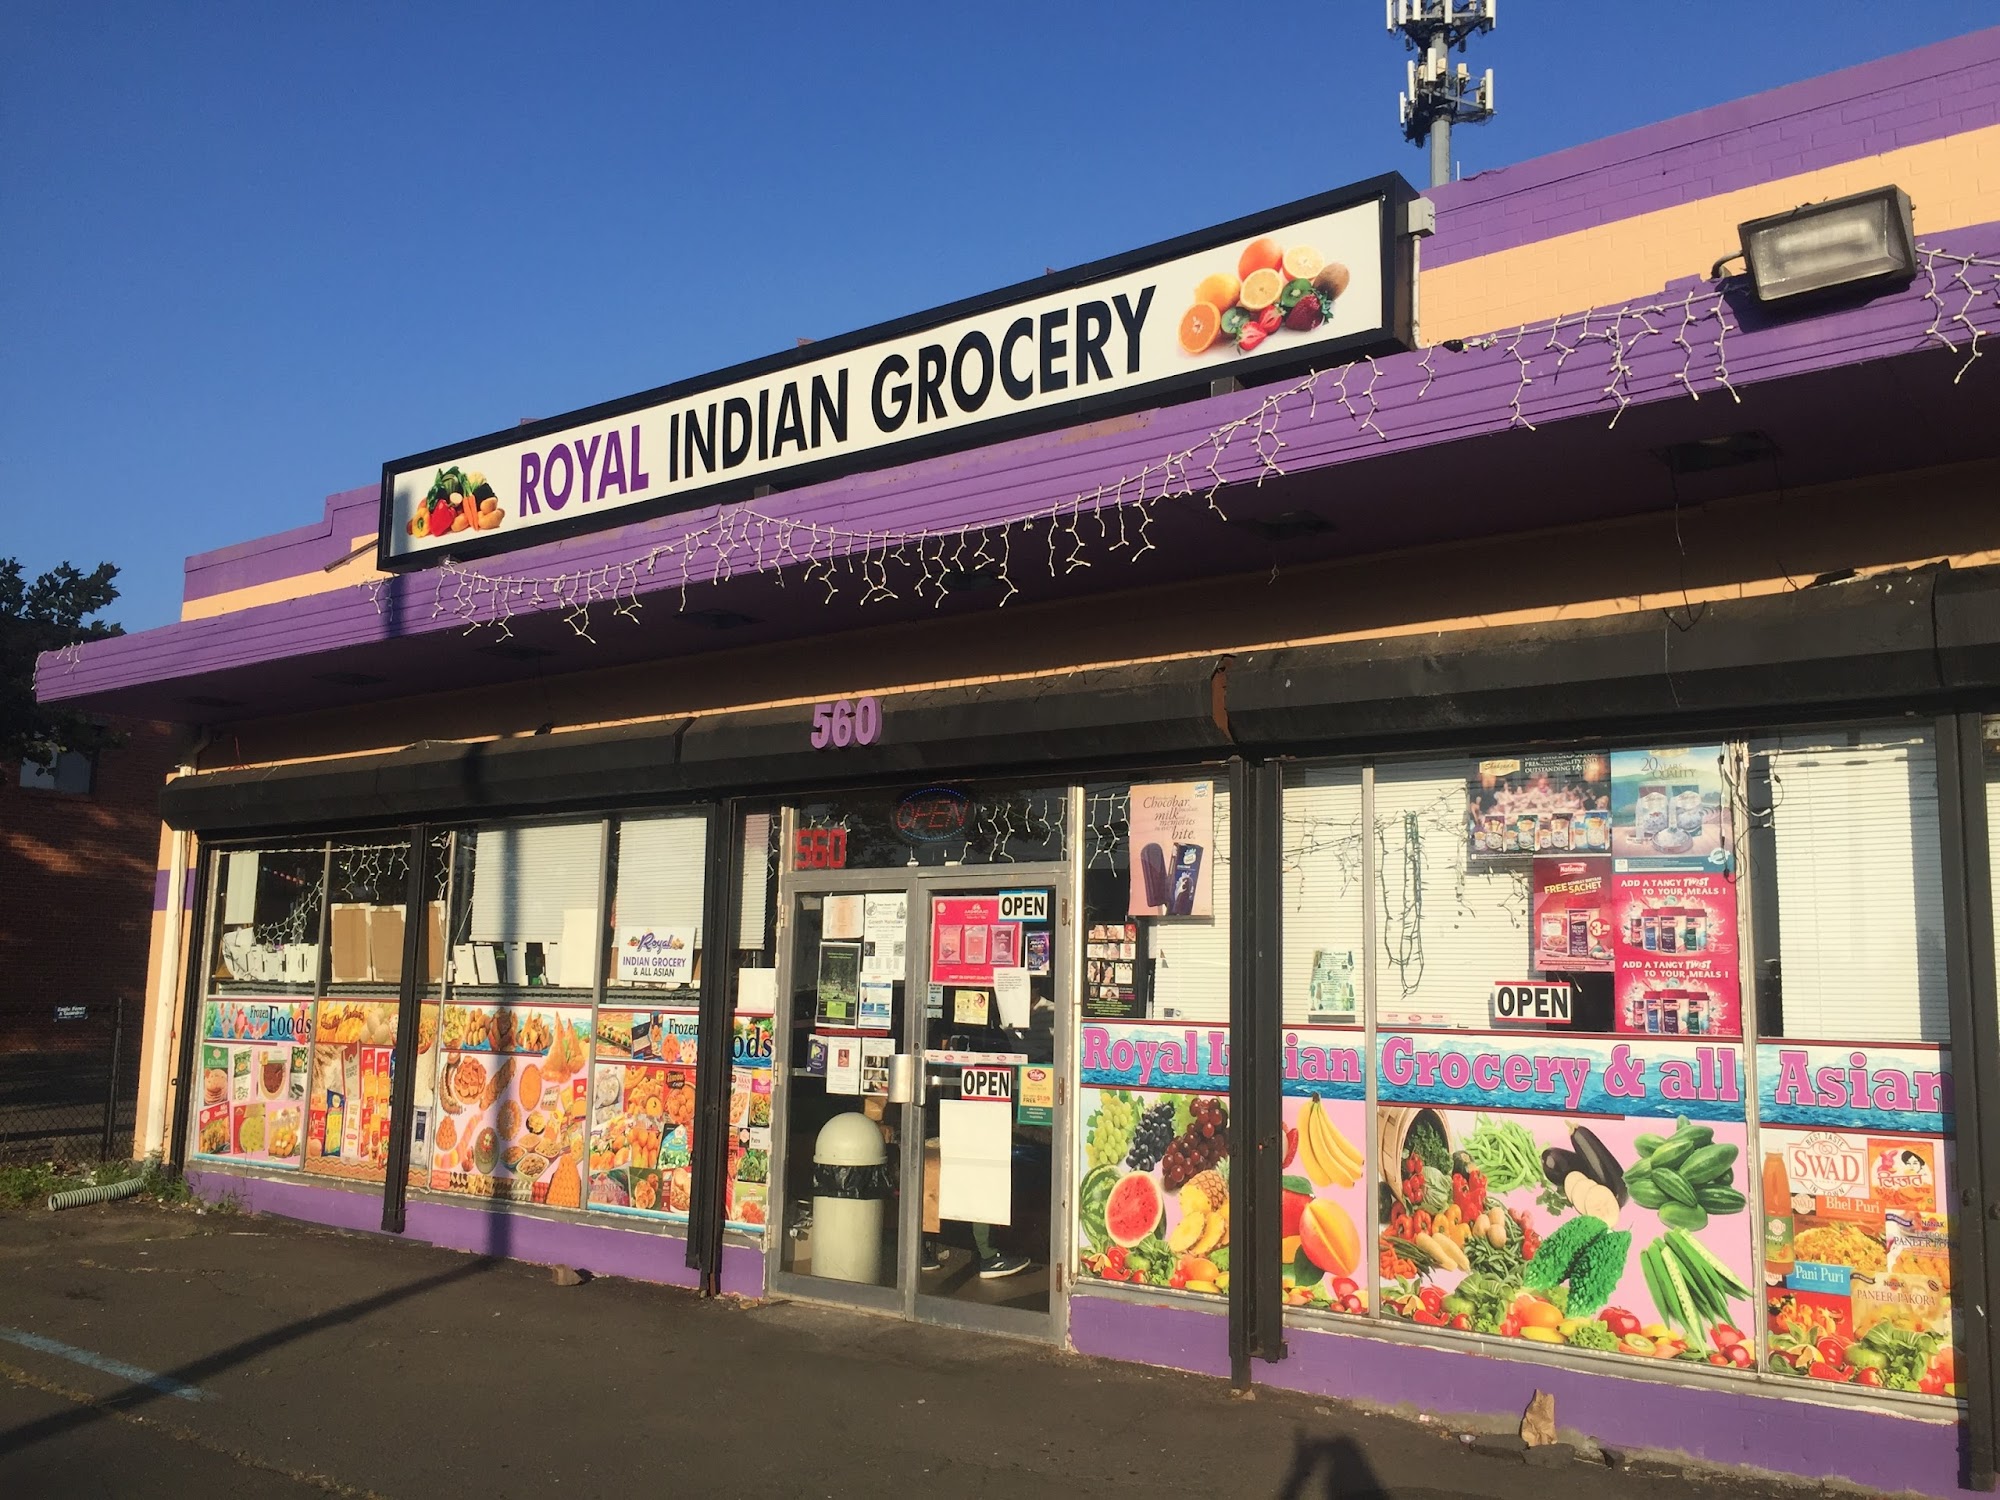 Royal Indian Grocery